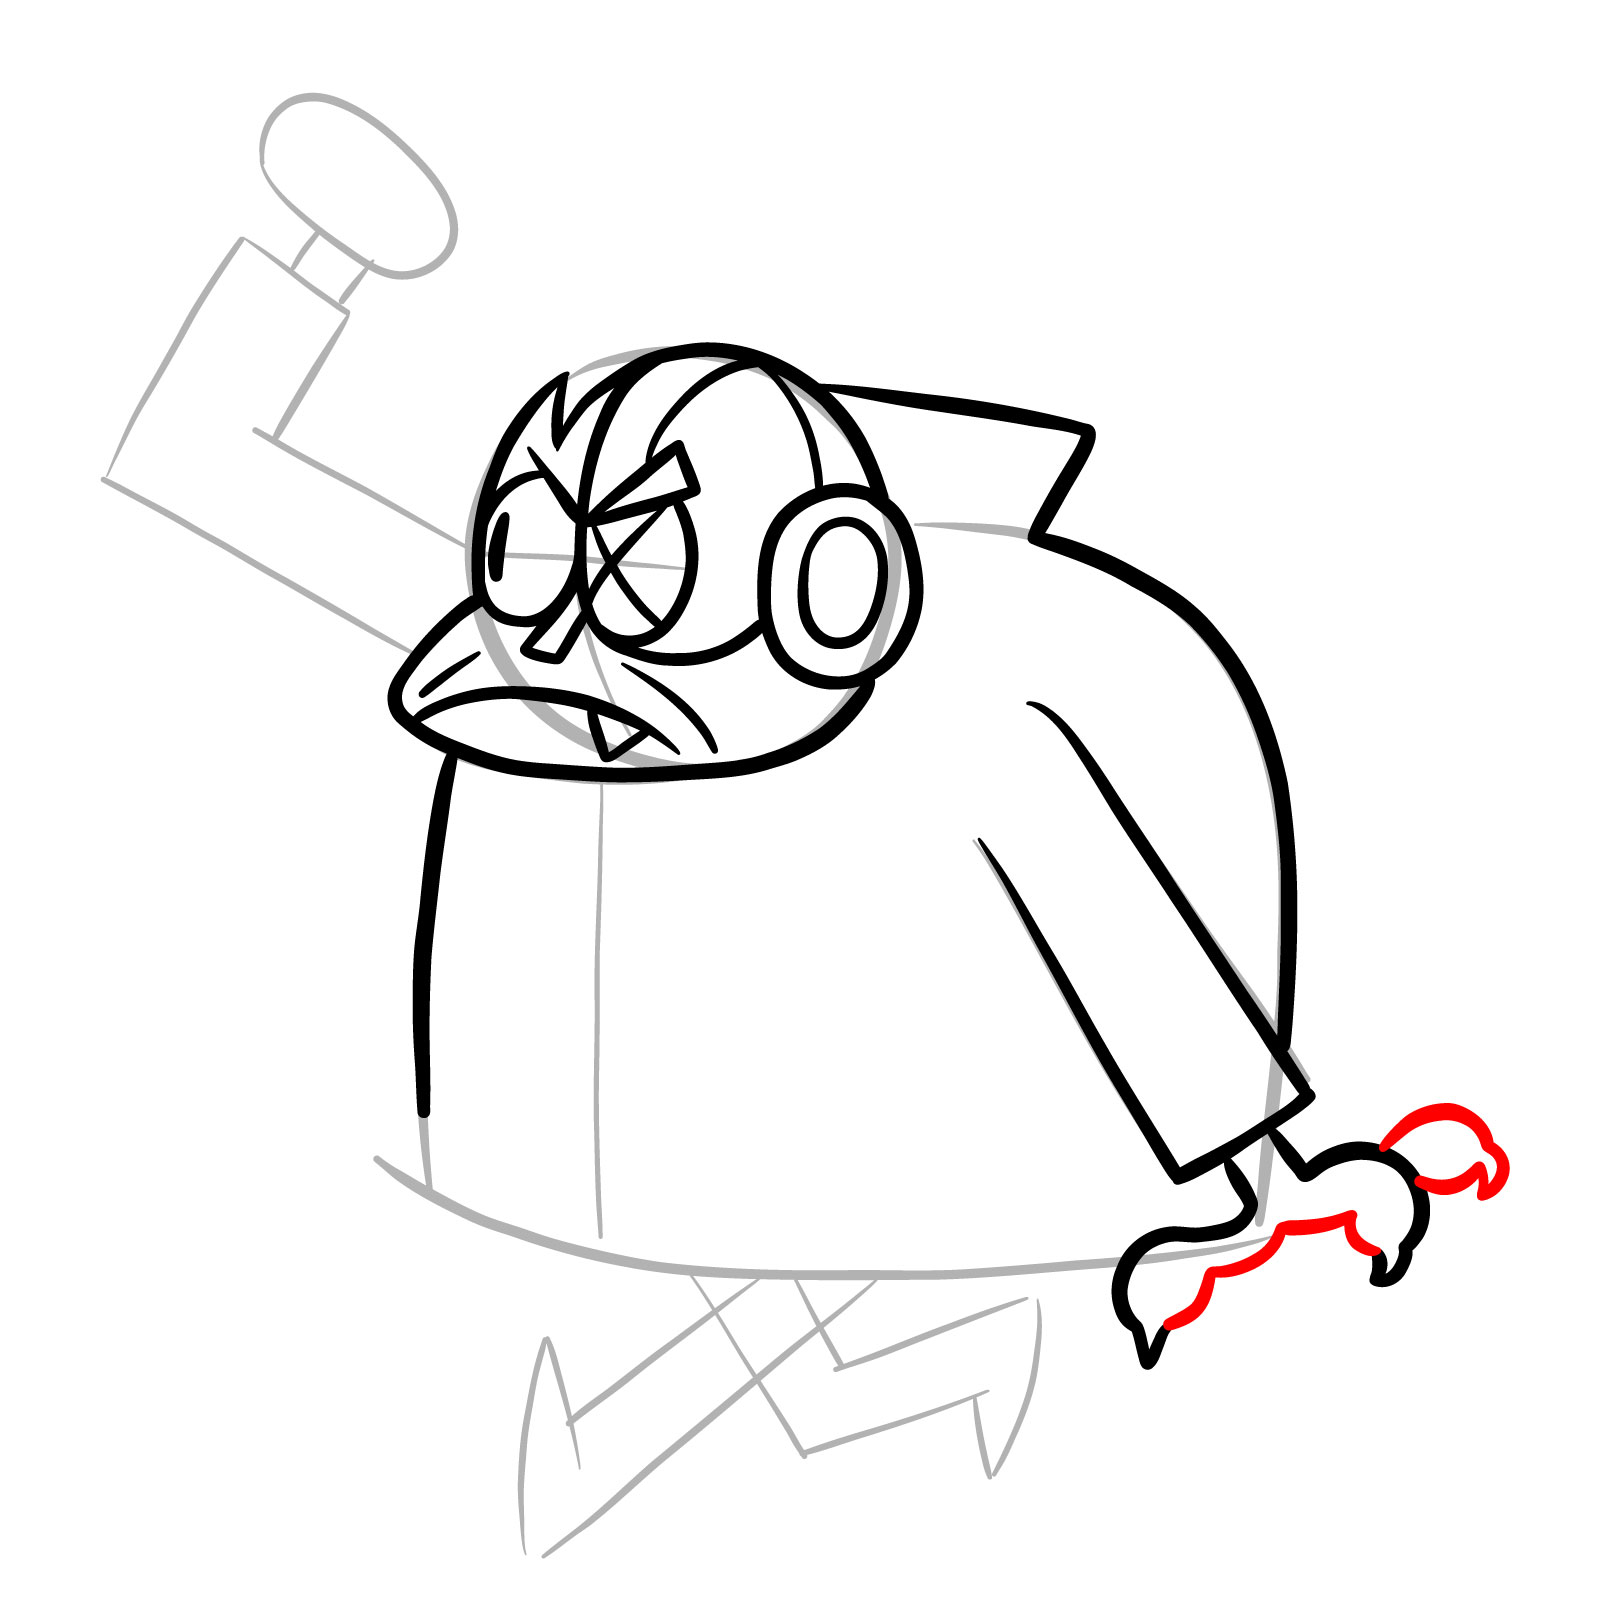 How to draw Lord Boxman from OK K.O.! - step 14